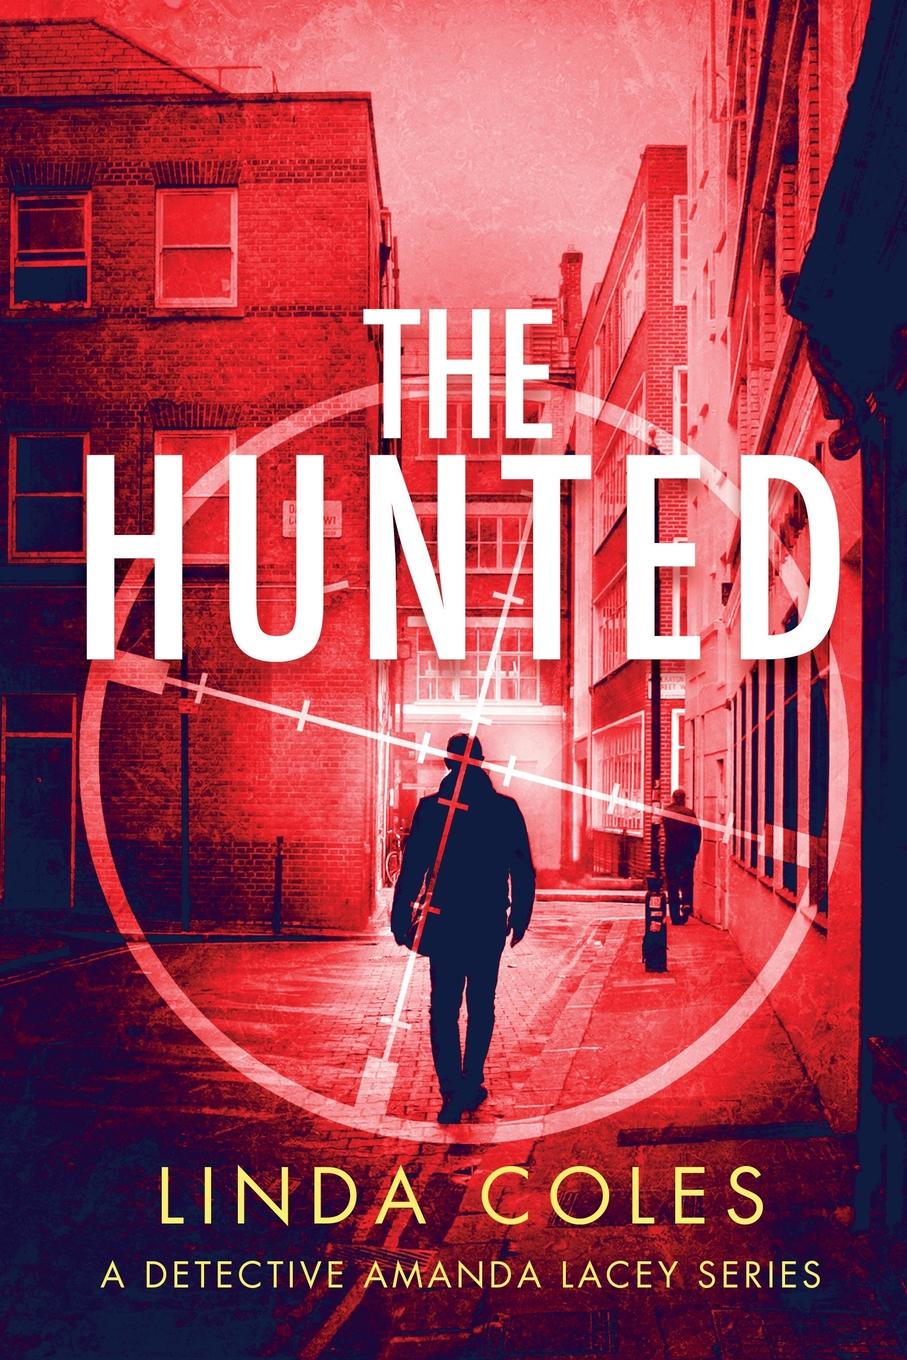 The Hunted. A Gripping Story of Vigilante Justice